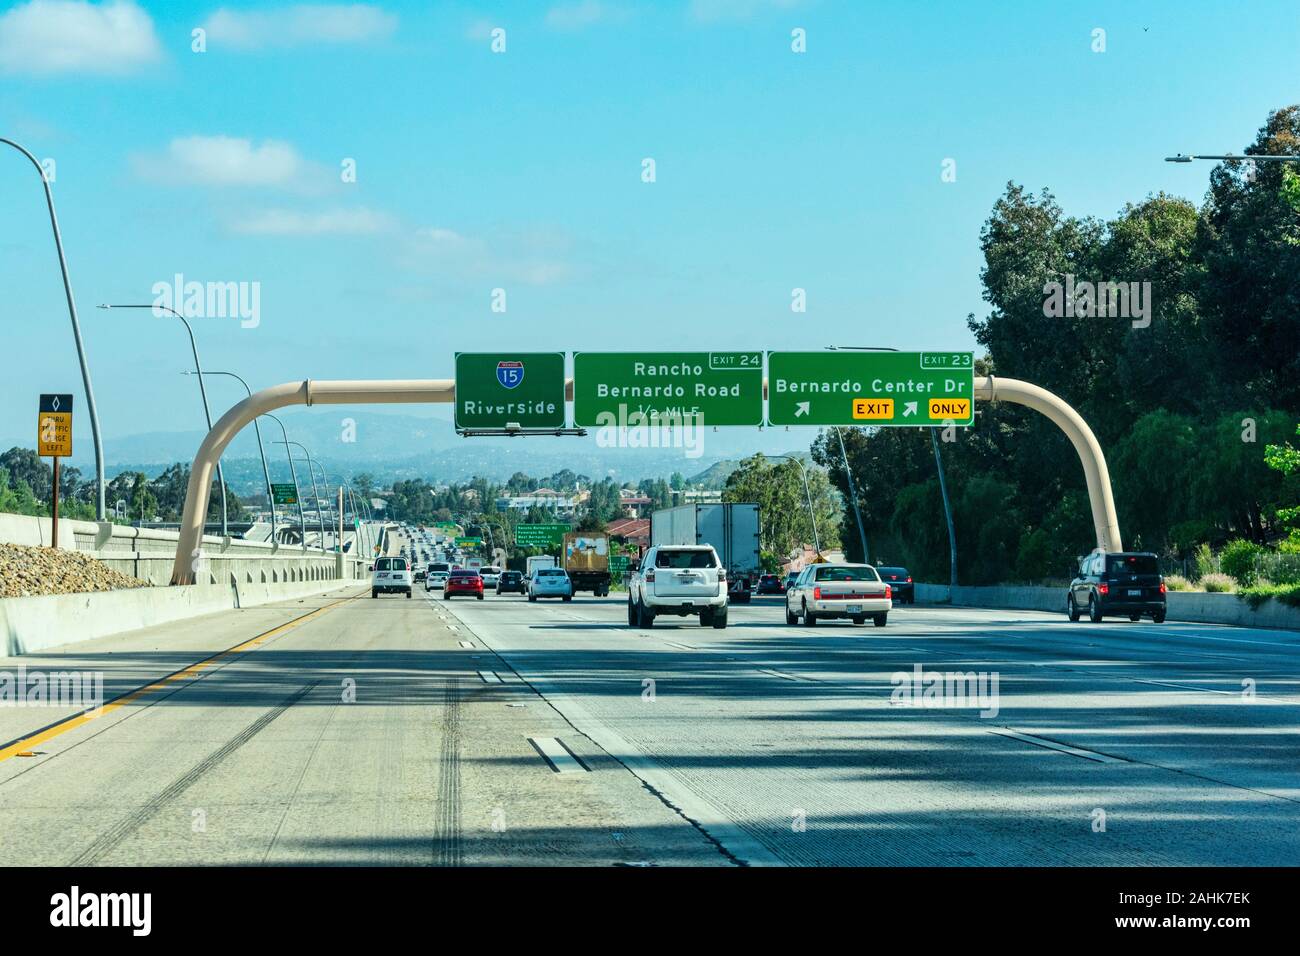 Guide signs on large overhead signage informing drivers about the intersections and highways, and distance and directions to destinations - Riverside, Stock Photo